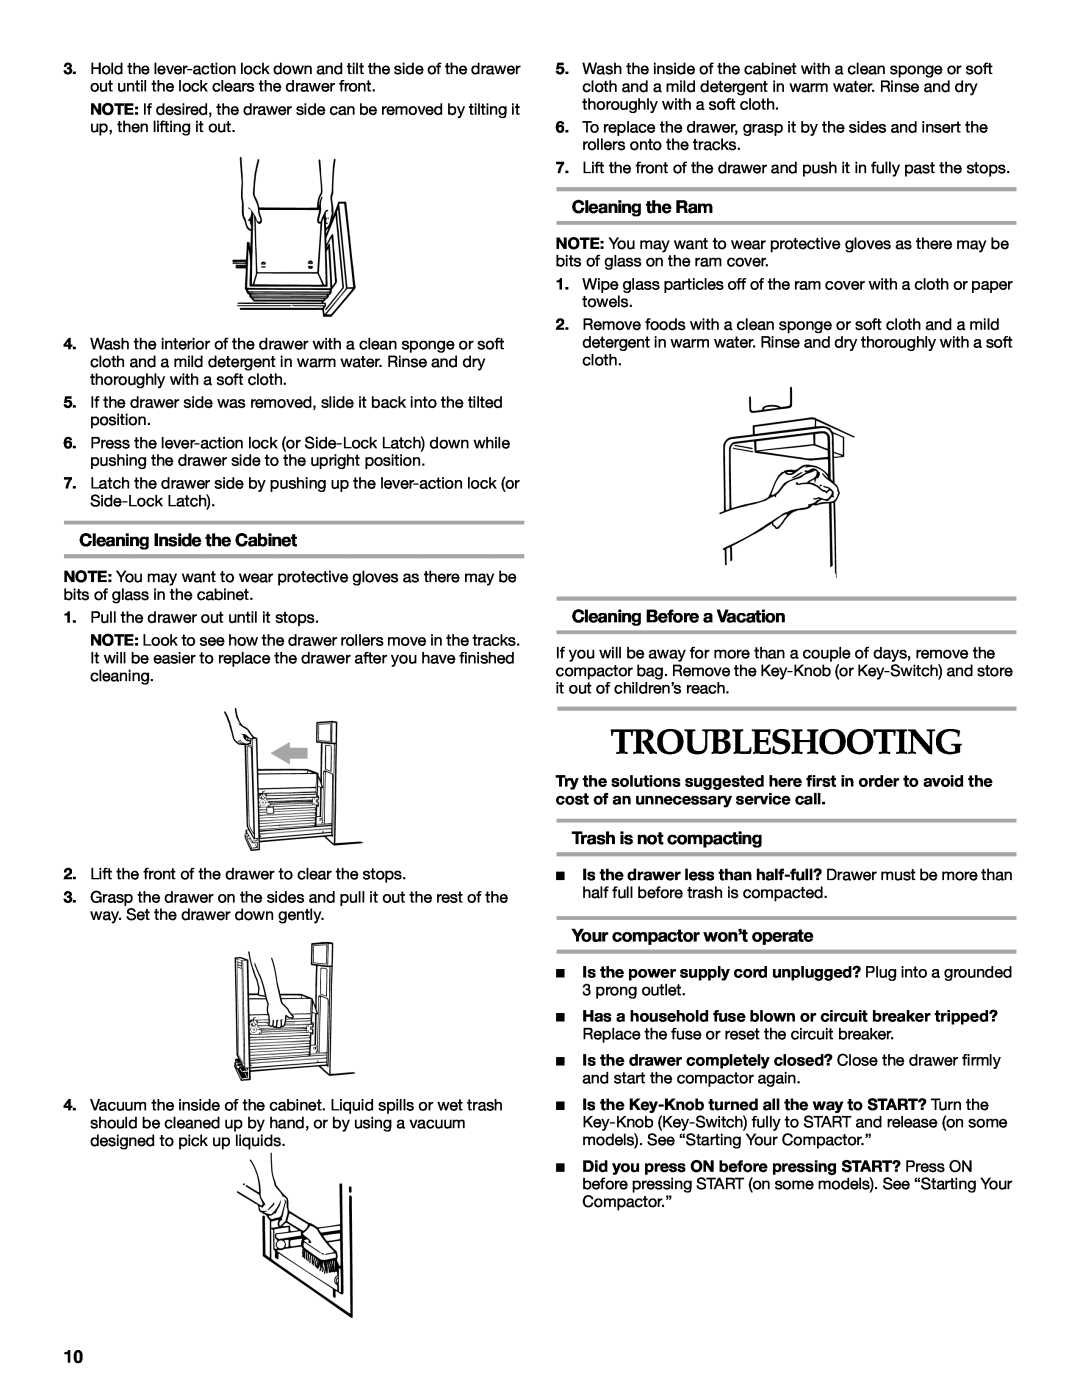 KitchenAid 9871915A manual Troubleshooting, Cleaning Inside the Cabinet, Cleaning the Ram, Cleaning Before a Vacation 